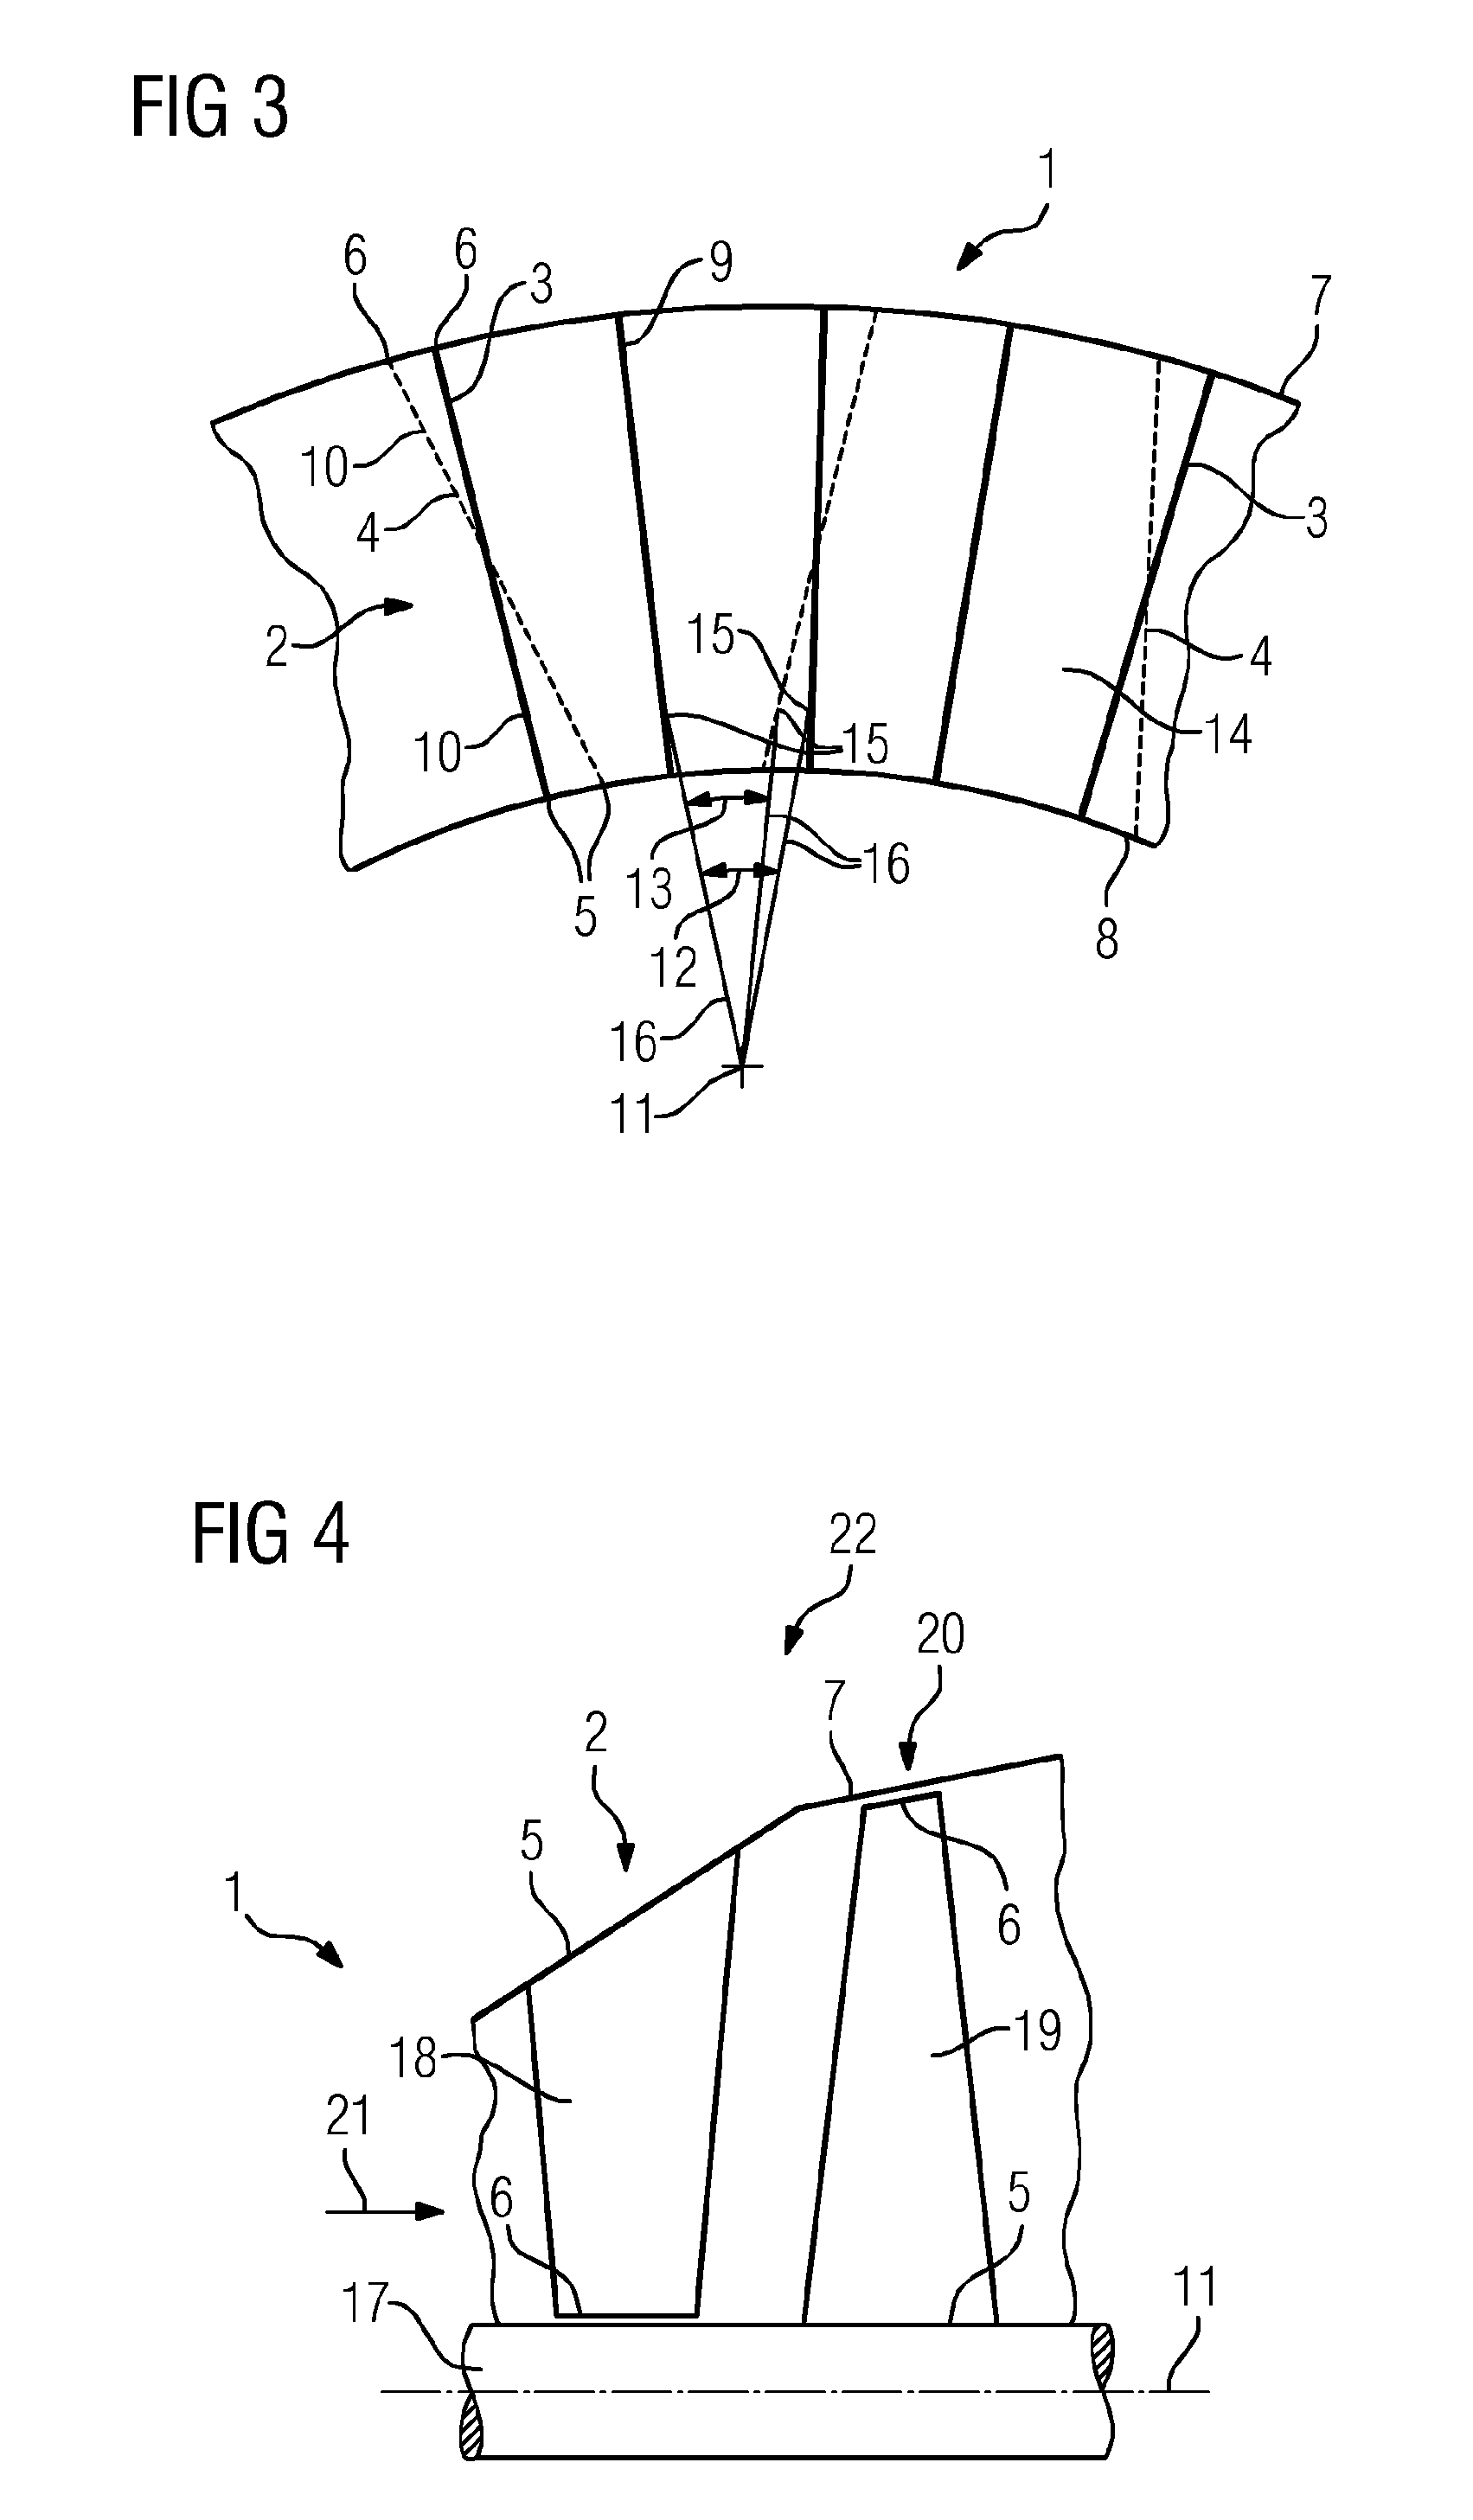 Guide blade ring for an axial turbomachine and method for designing the guide blade ring